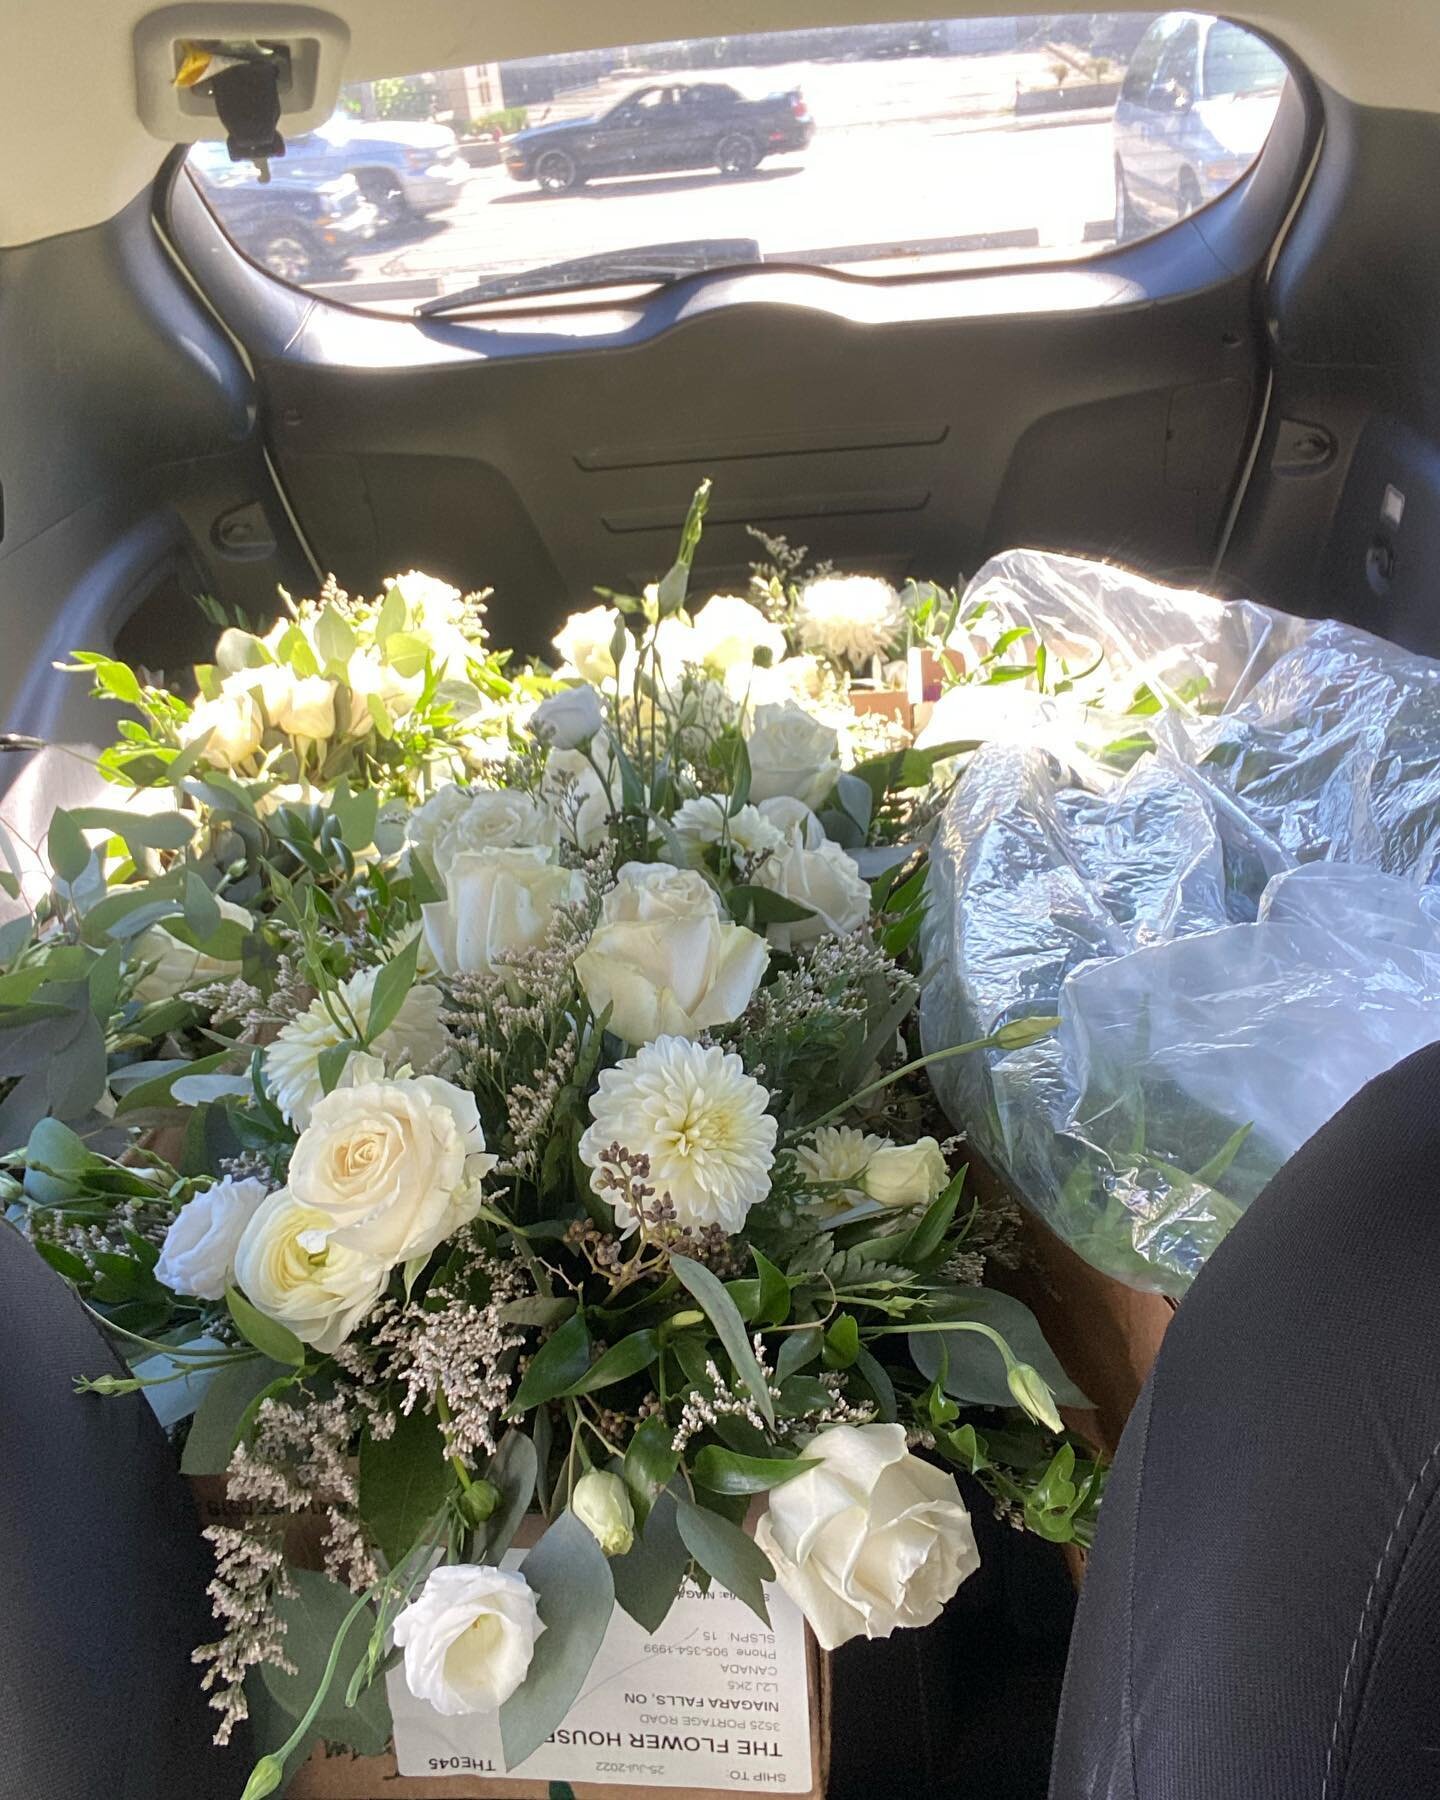 Loaded up for C &amp; J&rsquo;s wedding today @kehoeandkin! Thanks @the_flower_house for saving the day!!! 

#lastingevents #niagaraweddingplanner #niagaraweddings #2022weddingseason #julywedding #summerweddings #rusticwedding #vendorlove